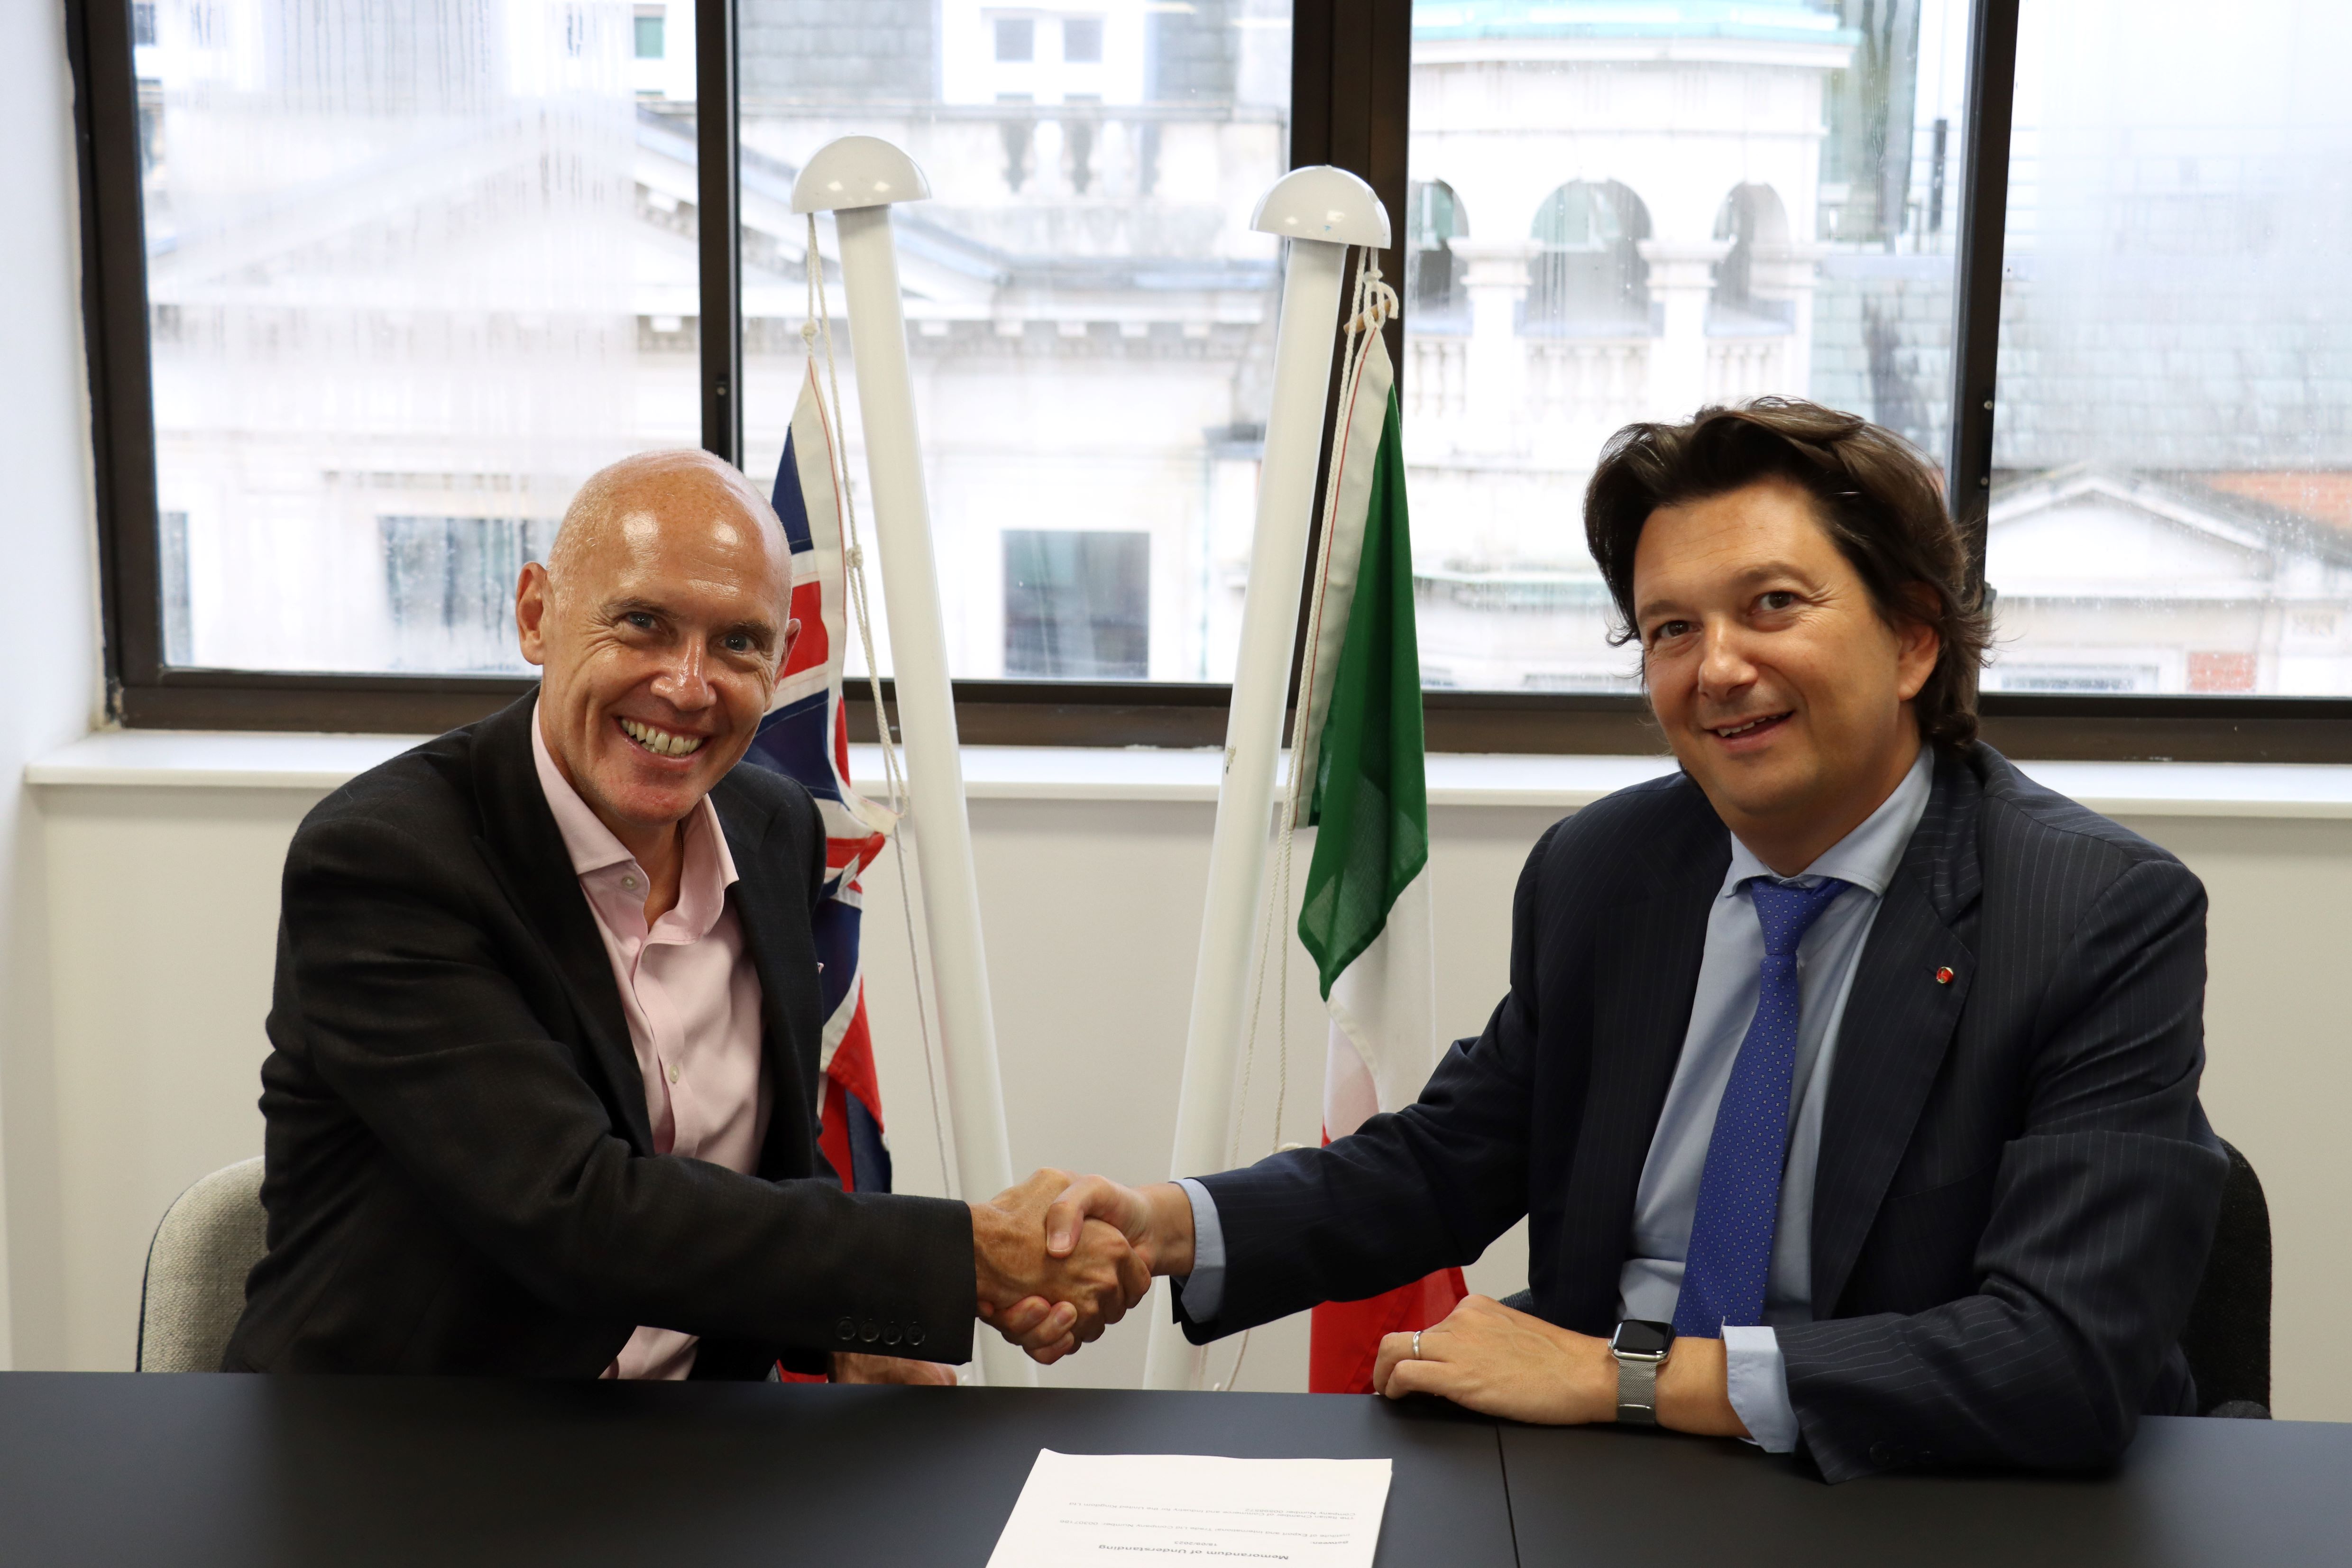 Marco Forgione shaking hands with Italian director general